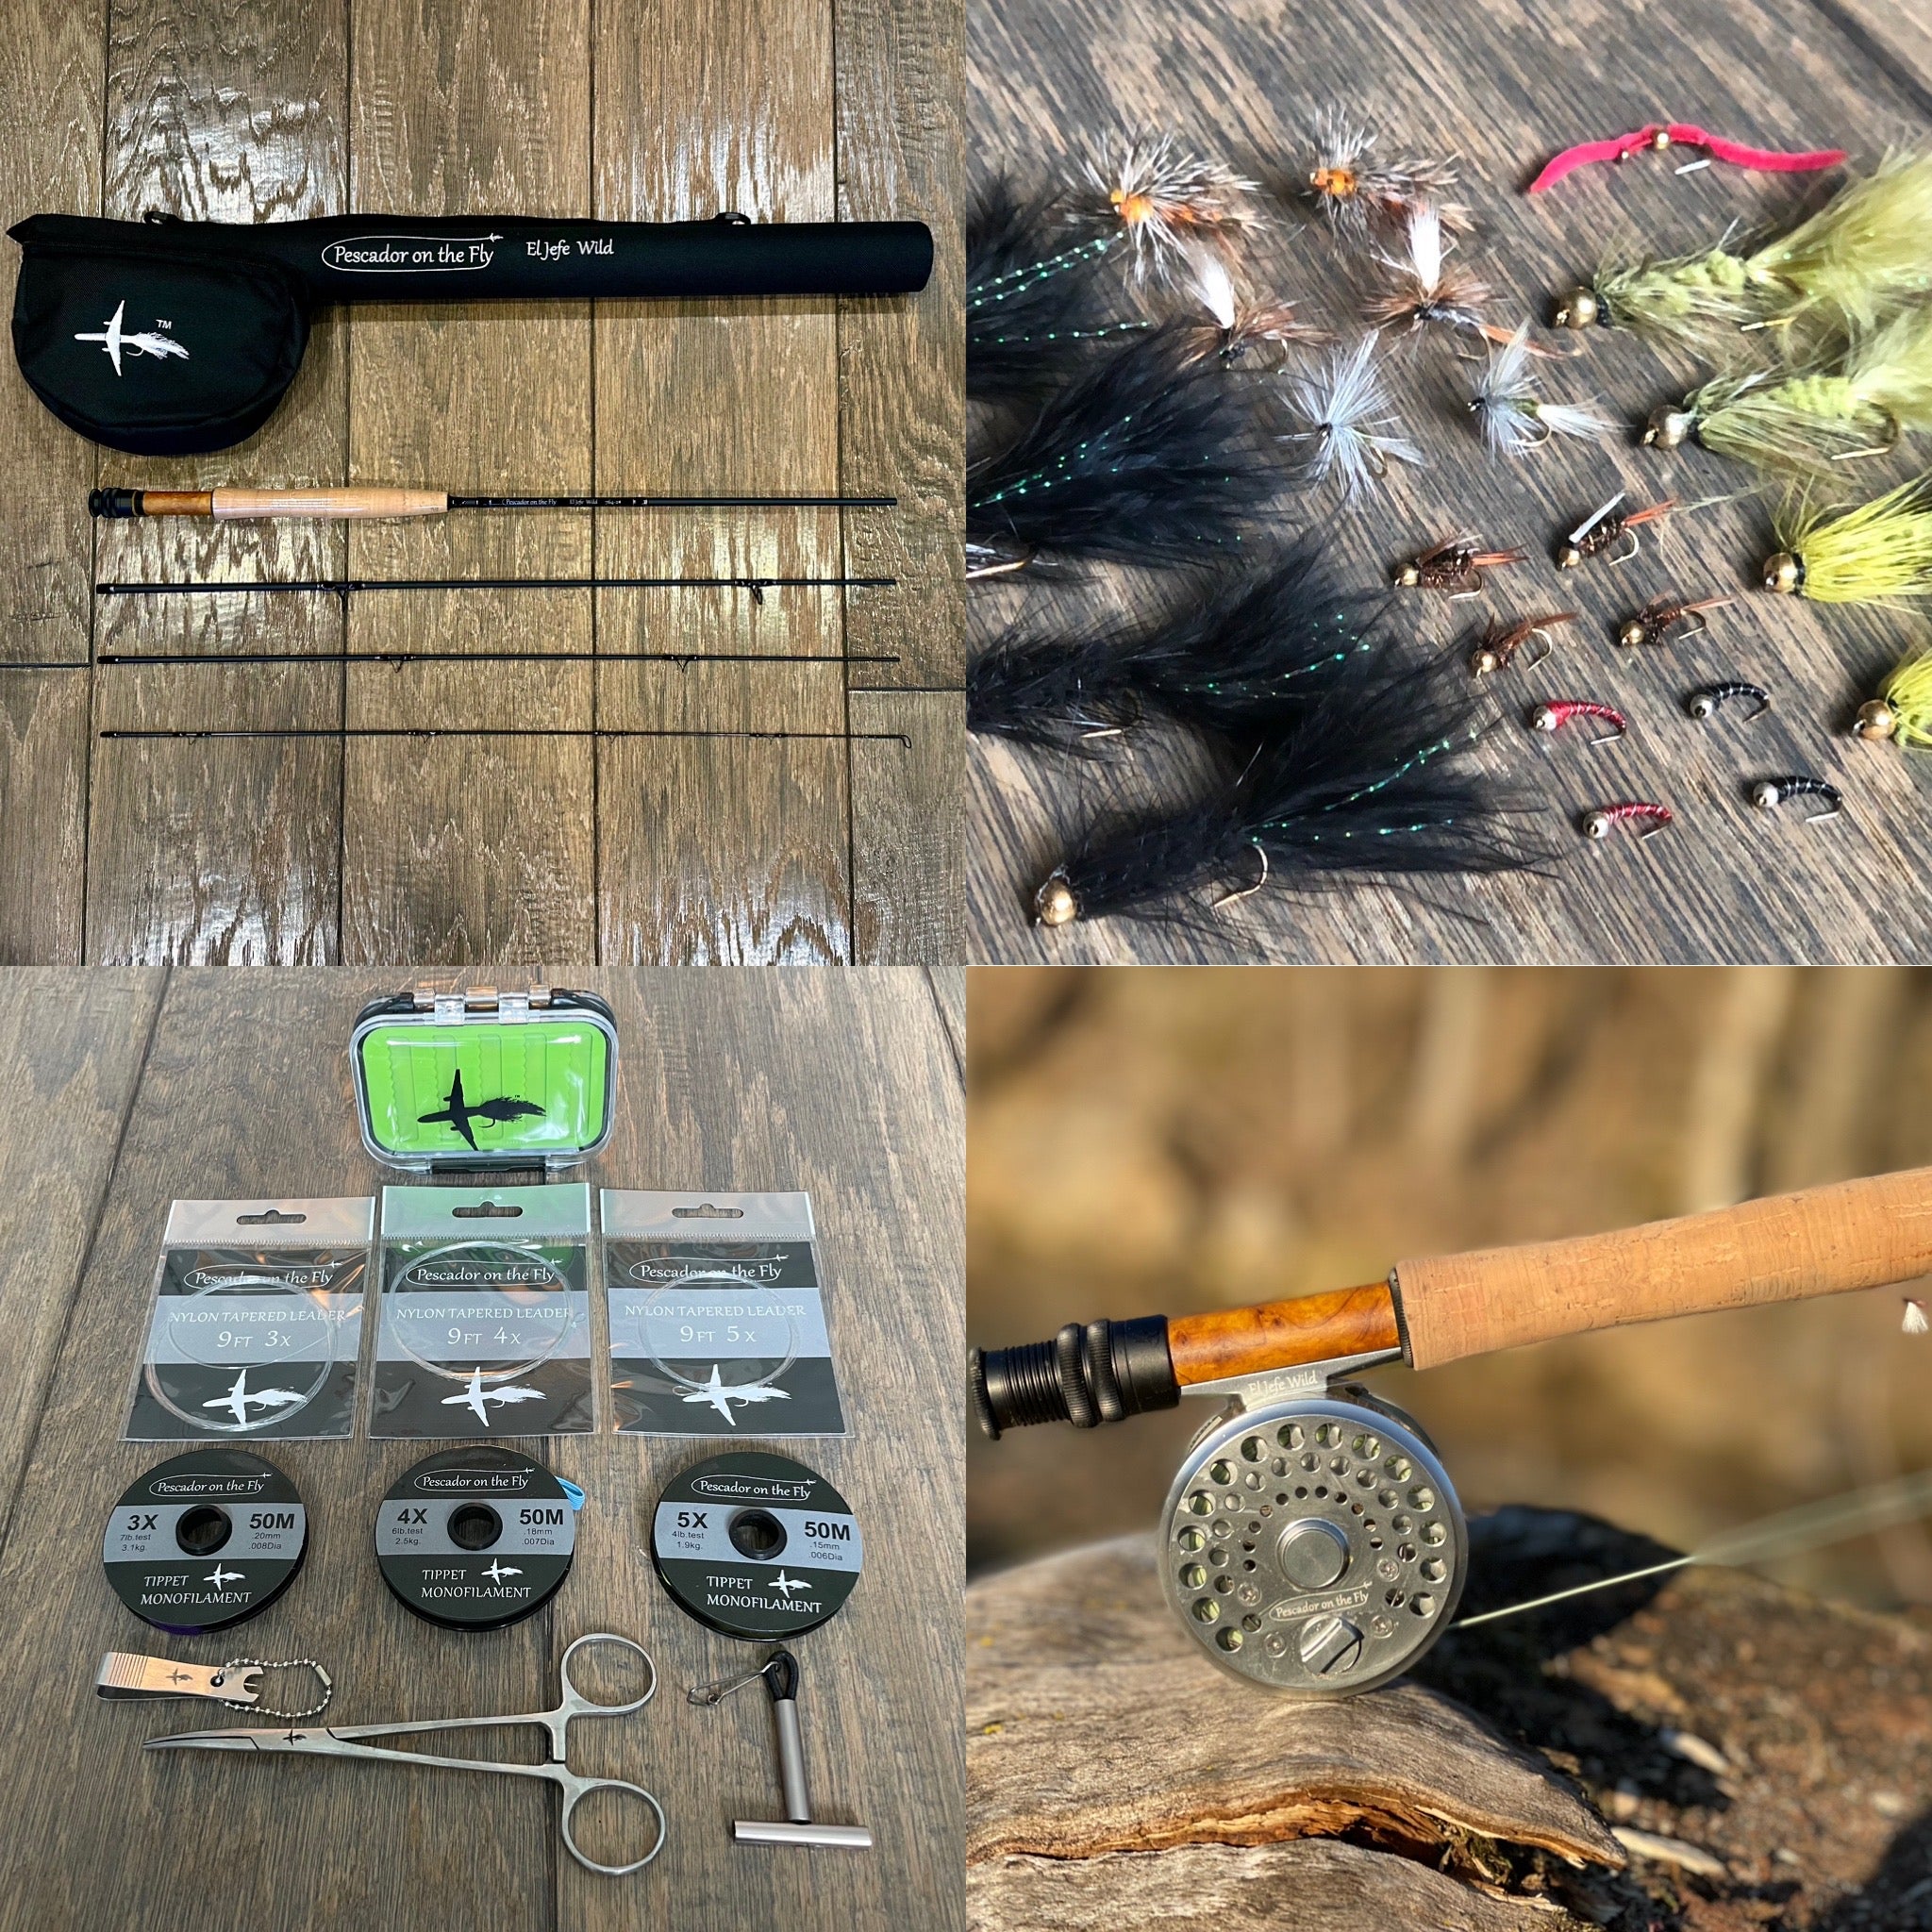 El Jefe Wild Fly Fishing Combo Package | 764 | 7'6" Four Section 2 Weight Fly Rod And Reel Outfit